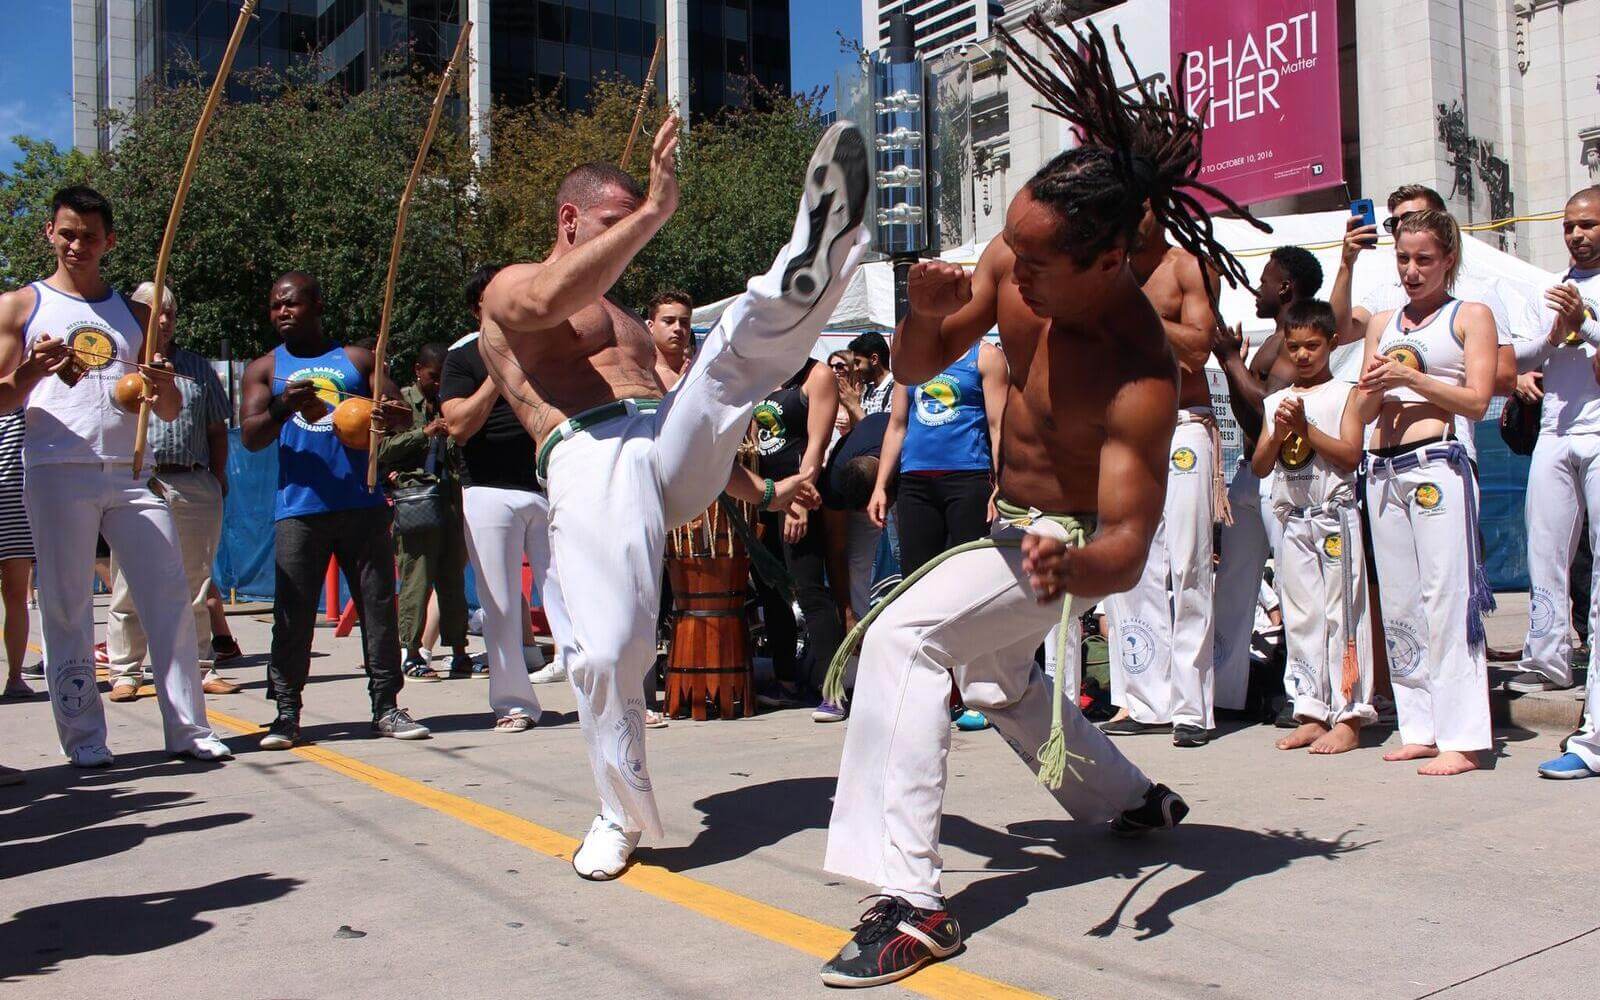 capoeira fighters doing a demonstration at the carnaval del sol in vancouver bc canada